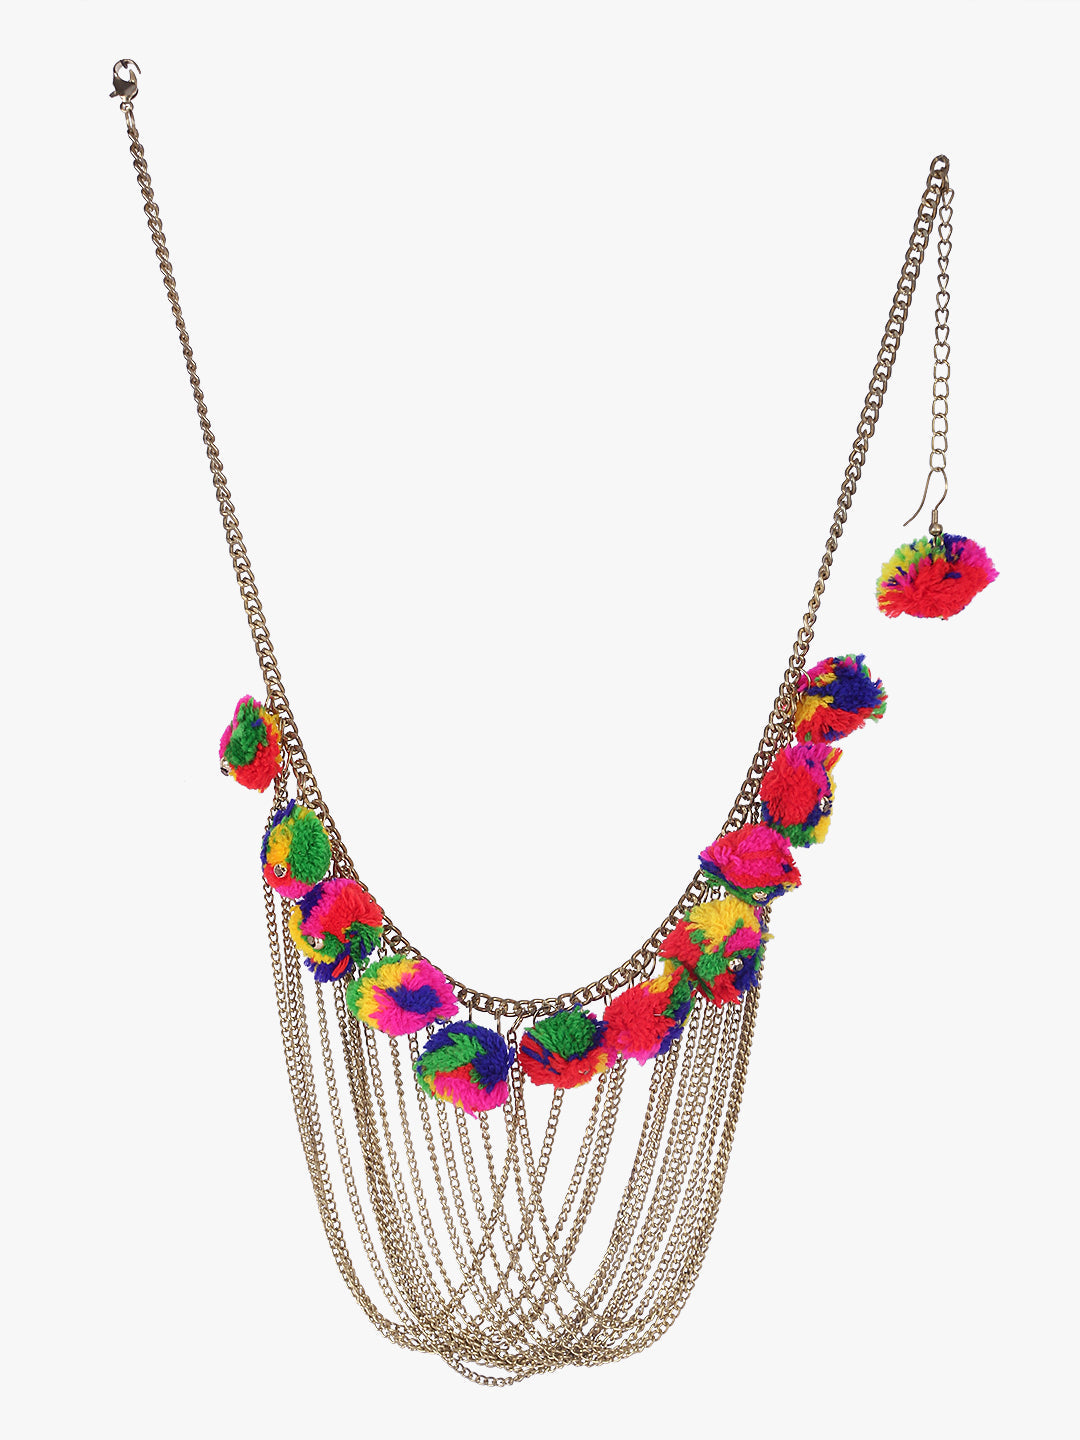 BownBee Chain Pompom necklace with earrings- multi